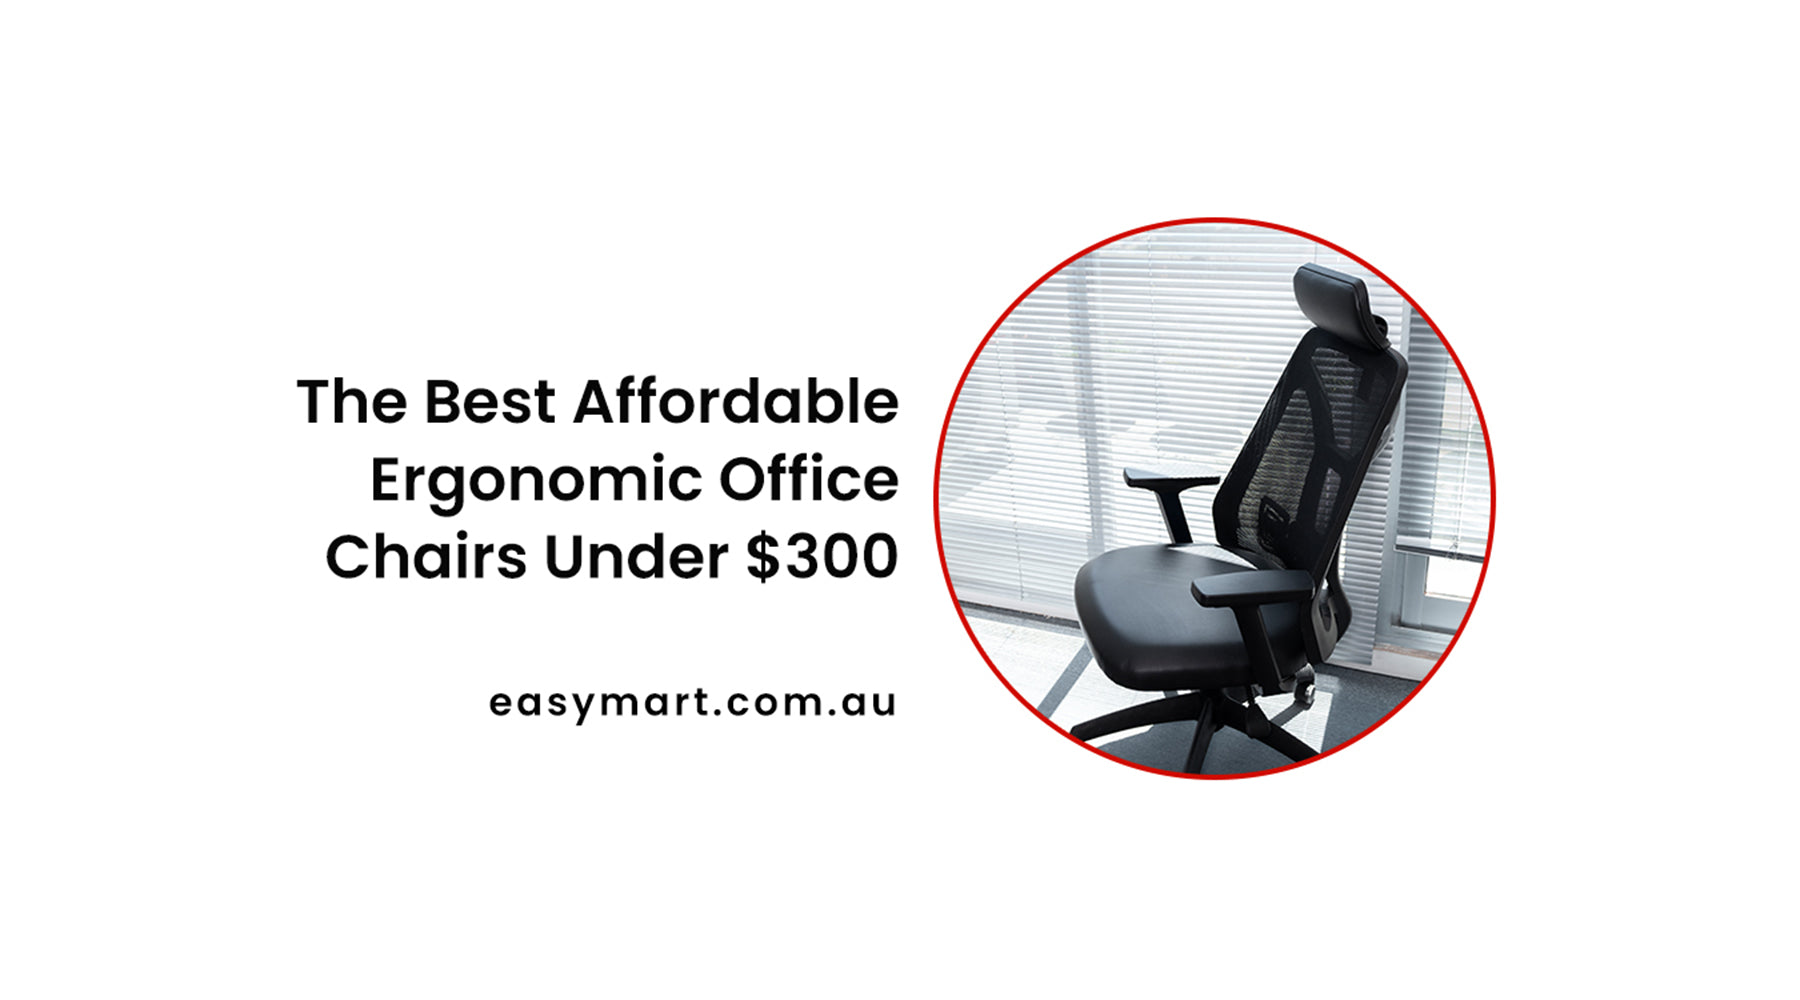 The Best Affordable Ergonomic Office Chairs Under $300